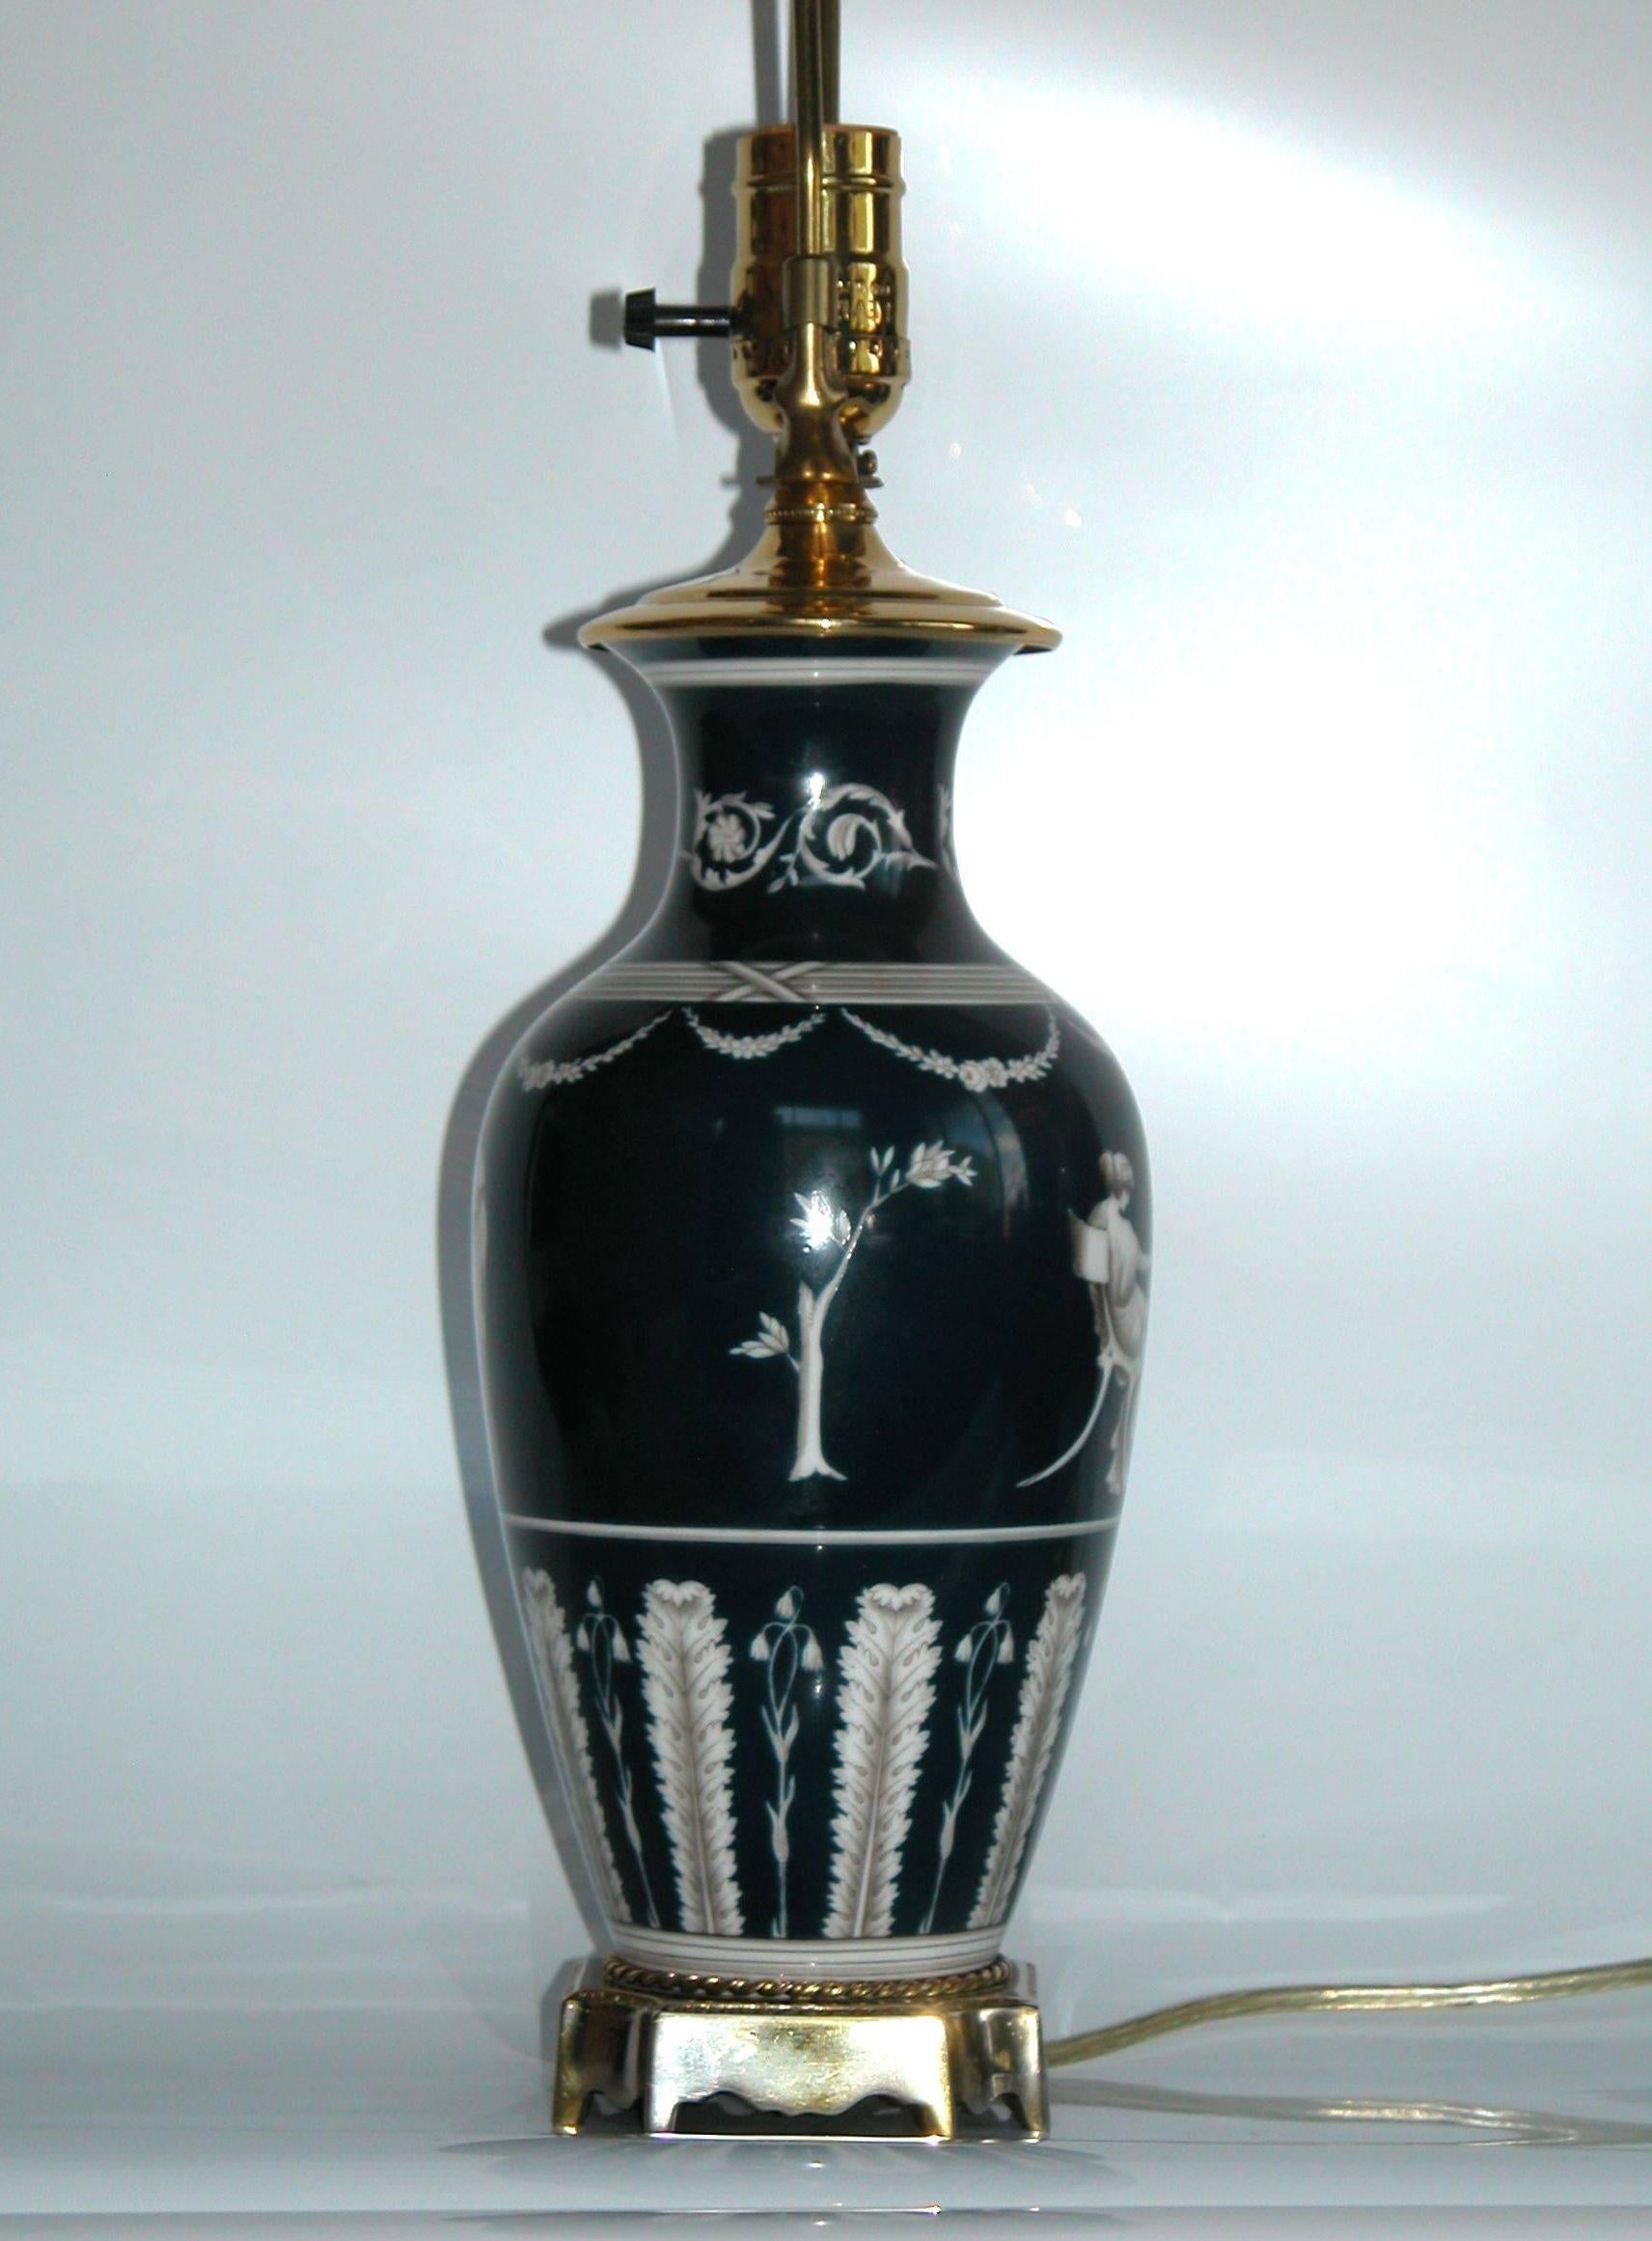 Classically inspired theme circling the vase, recently rewired, cleaned and polished. The vase itself (with base) measures 10 inches tall.